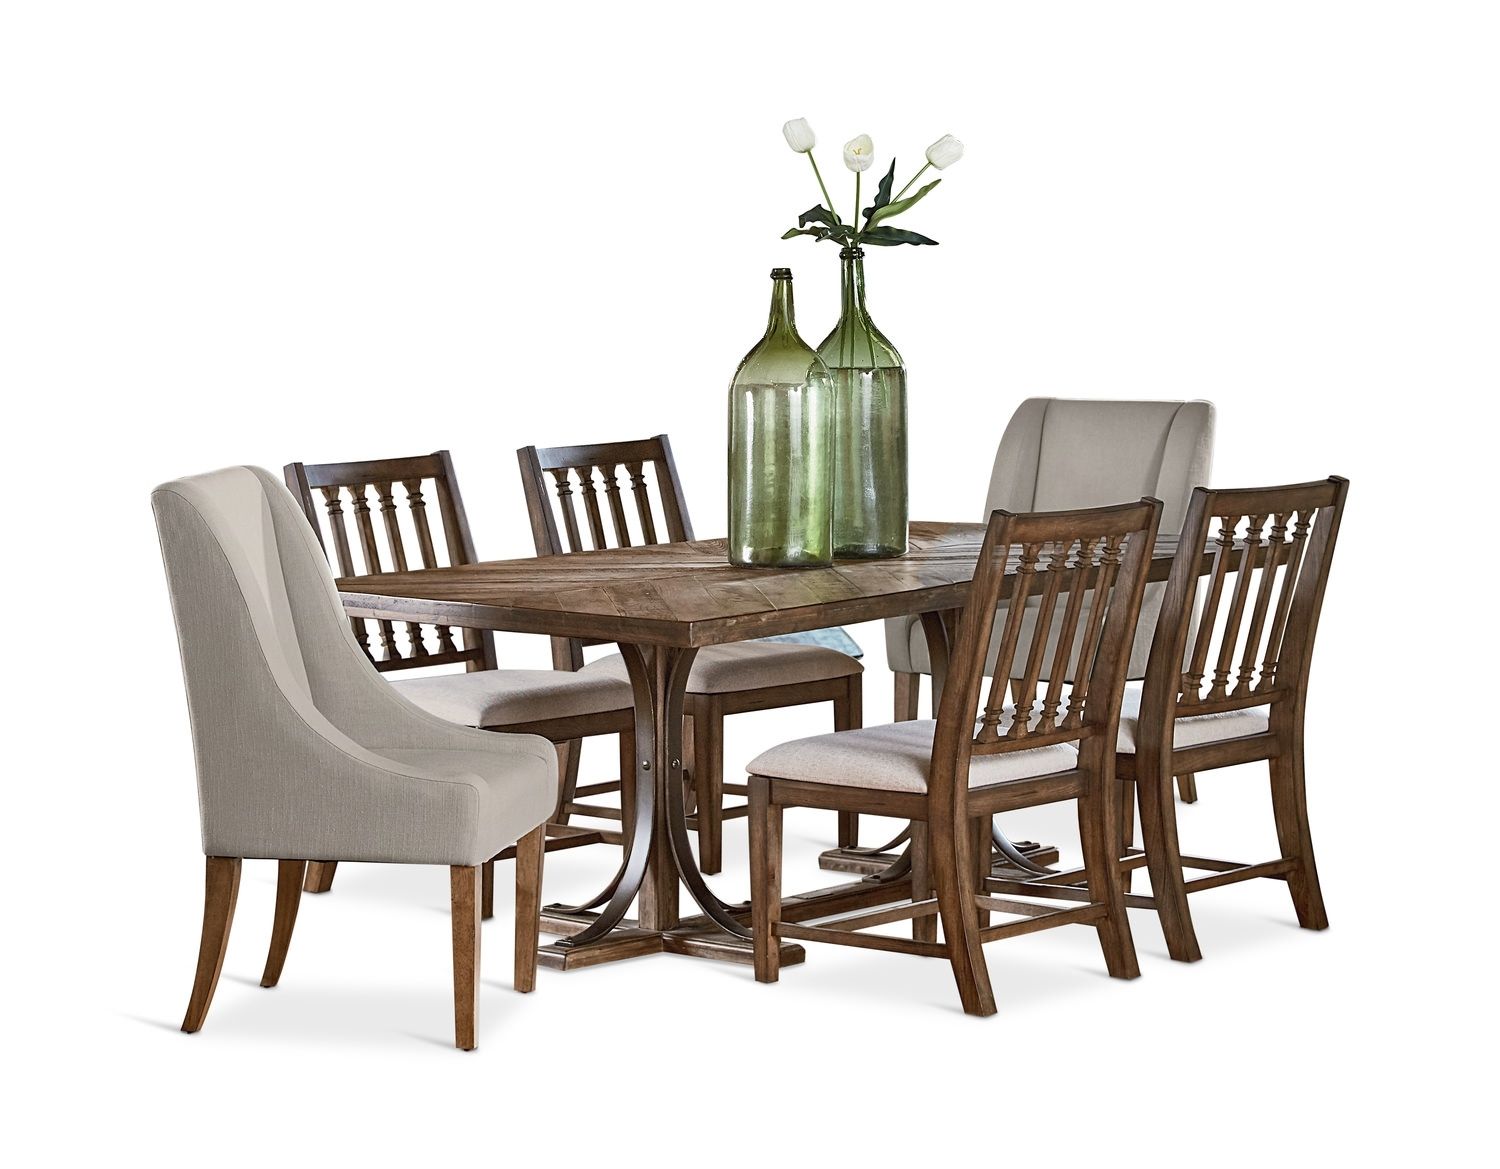 Magnolia Home Revival Side Chairs With Regard To Trendy Trestle Dining Table And 4 Revival Side (View 8 of 20)